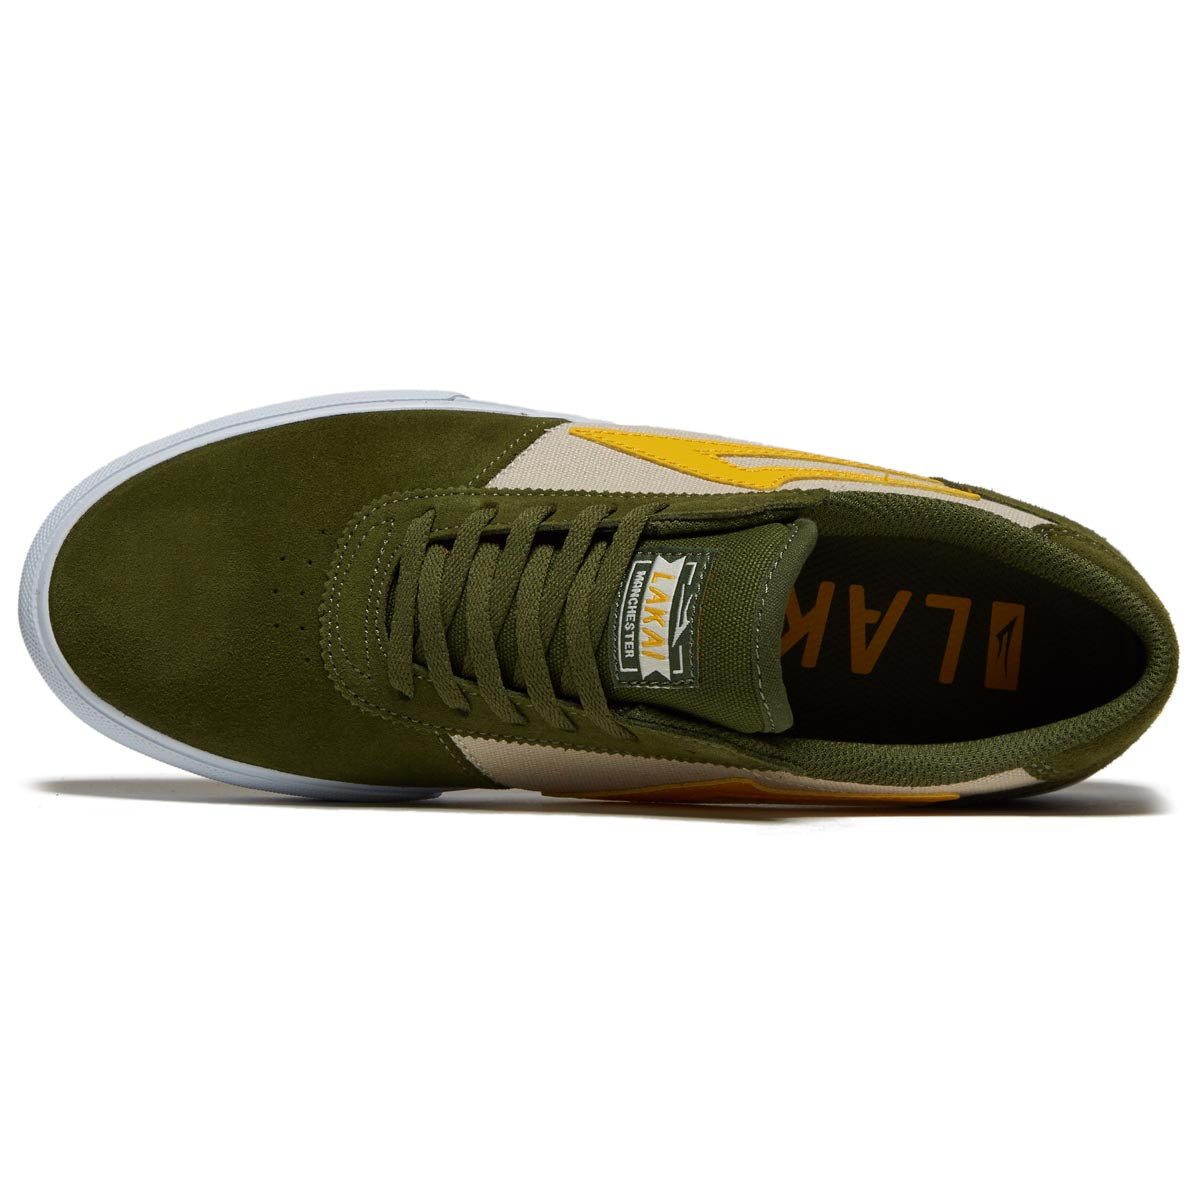 Lakai Manchester Shoes - Chive Suede image 3